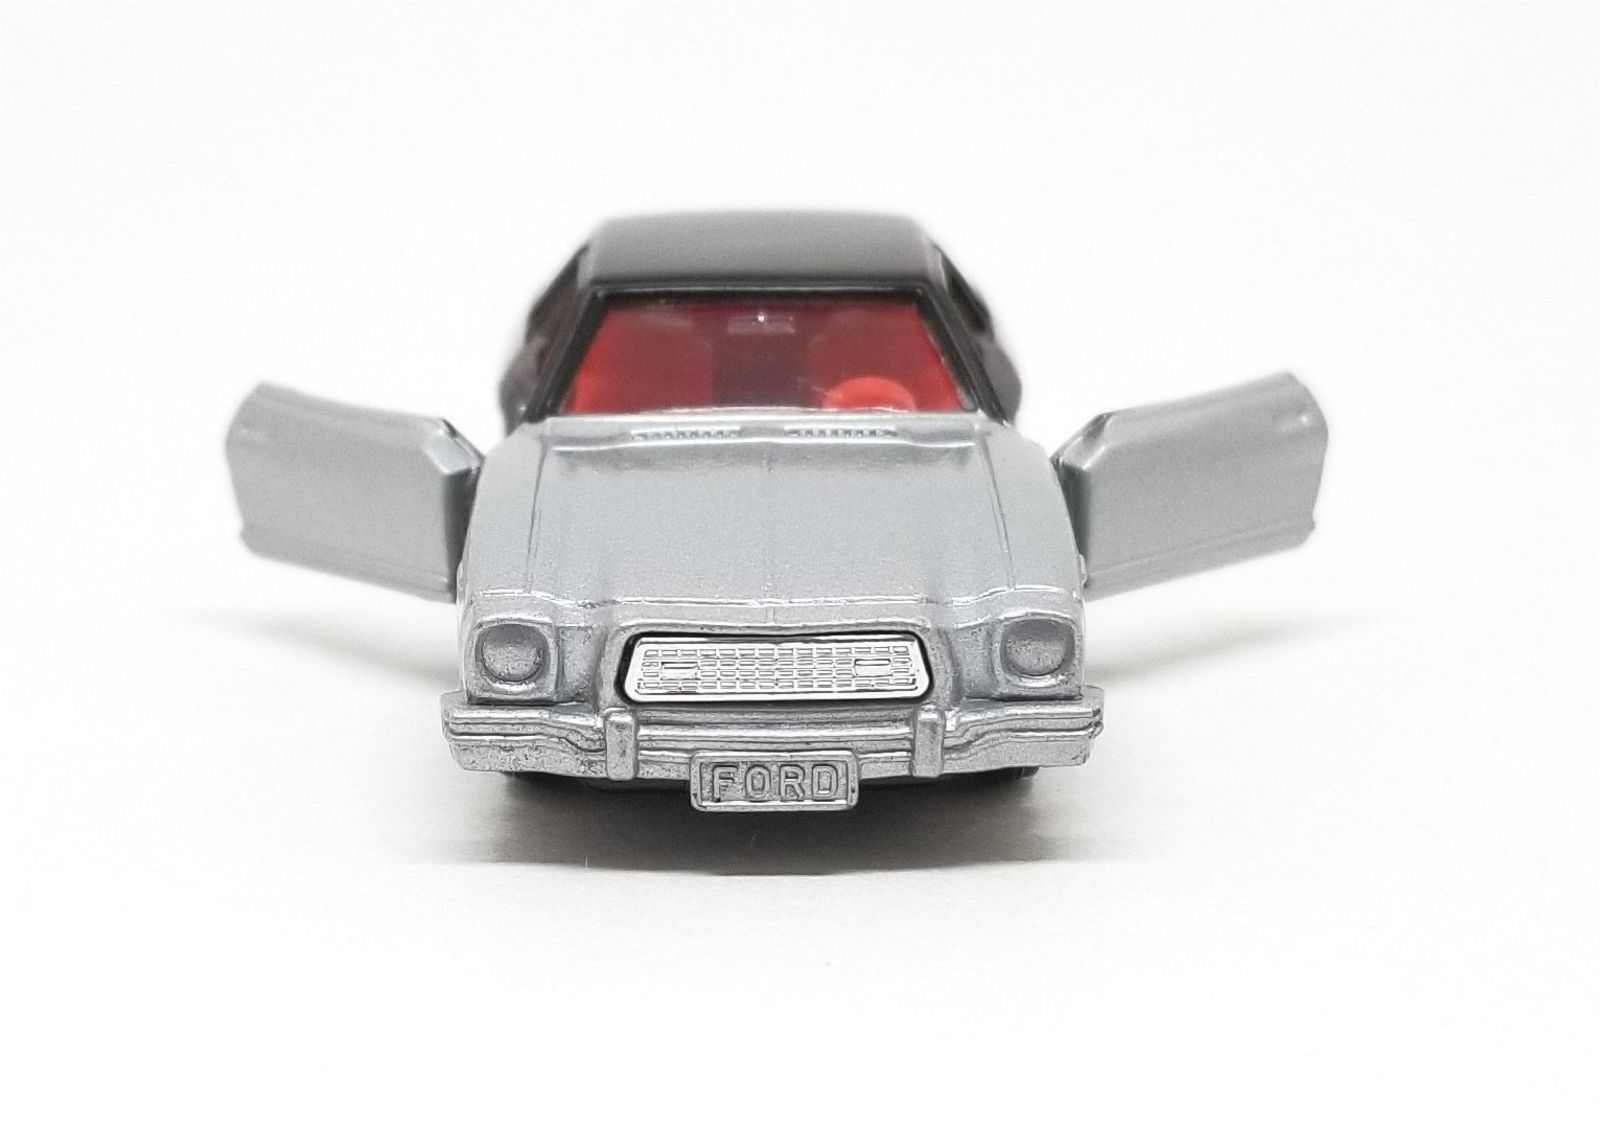 Illustration for article titled [REVIEW] Tomica Ford Mustang II Ghia